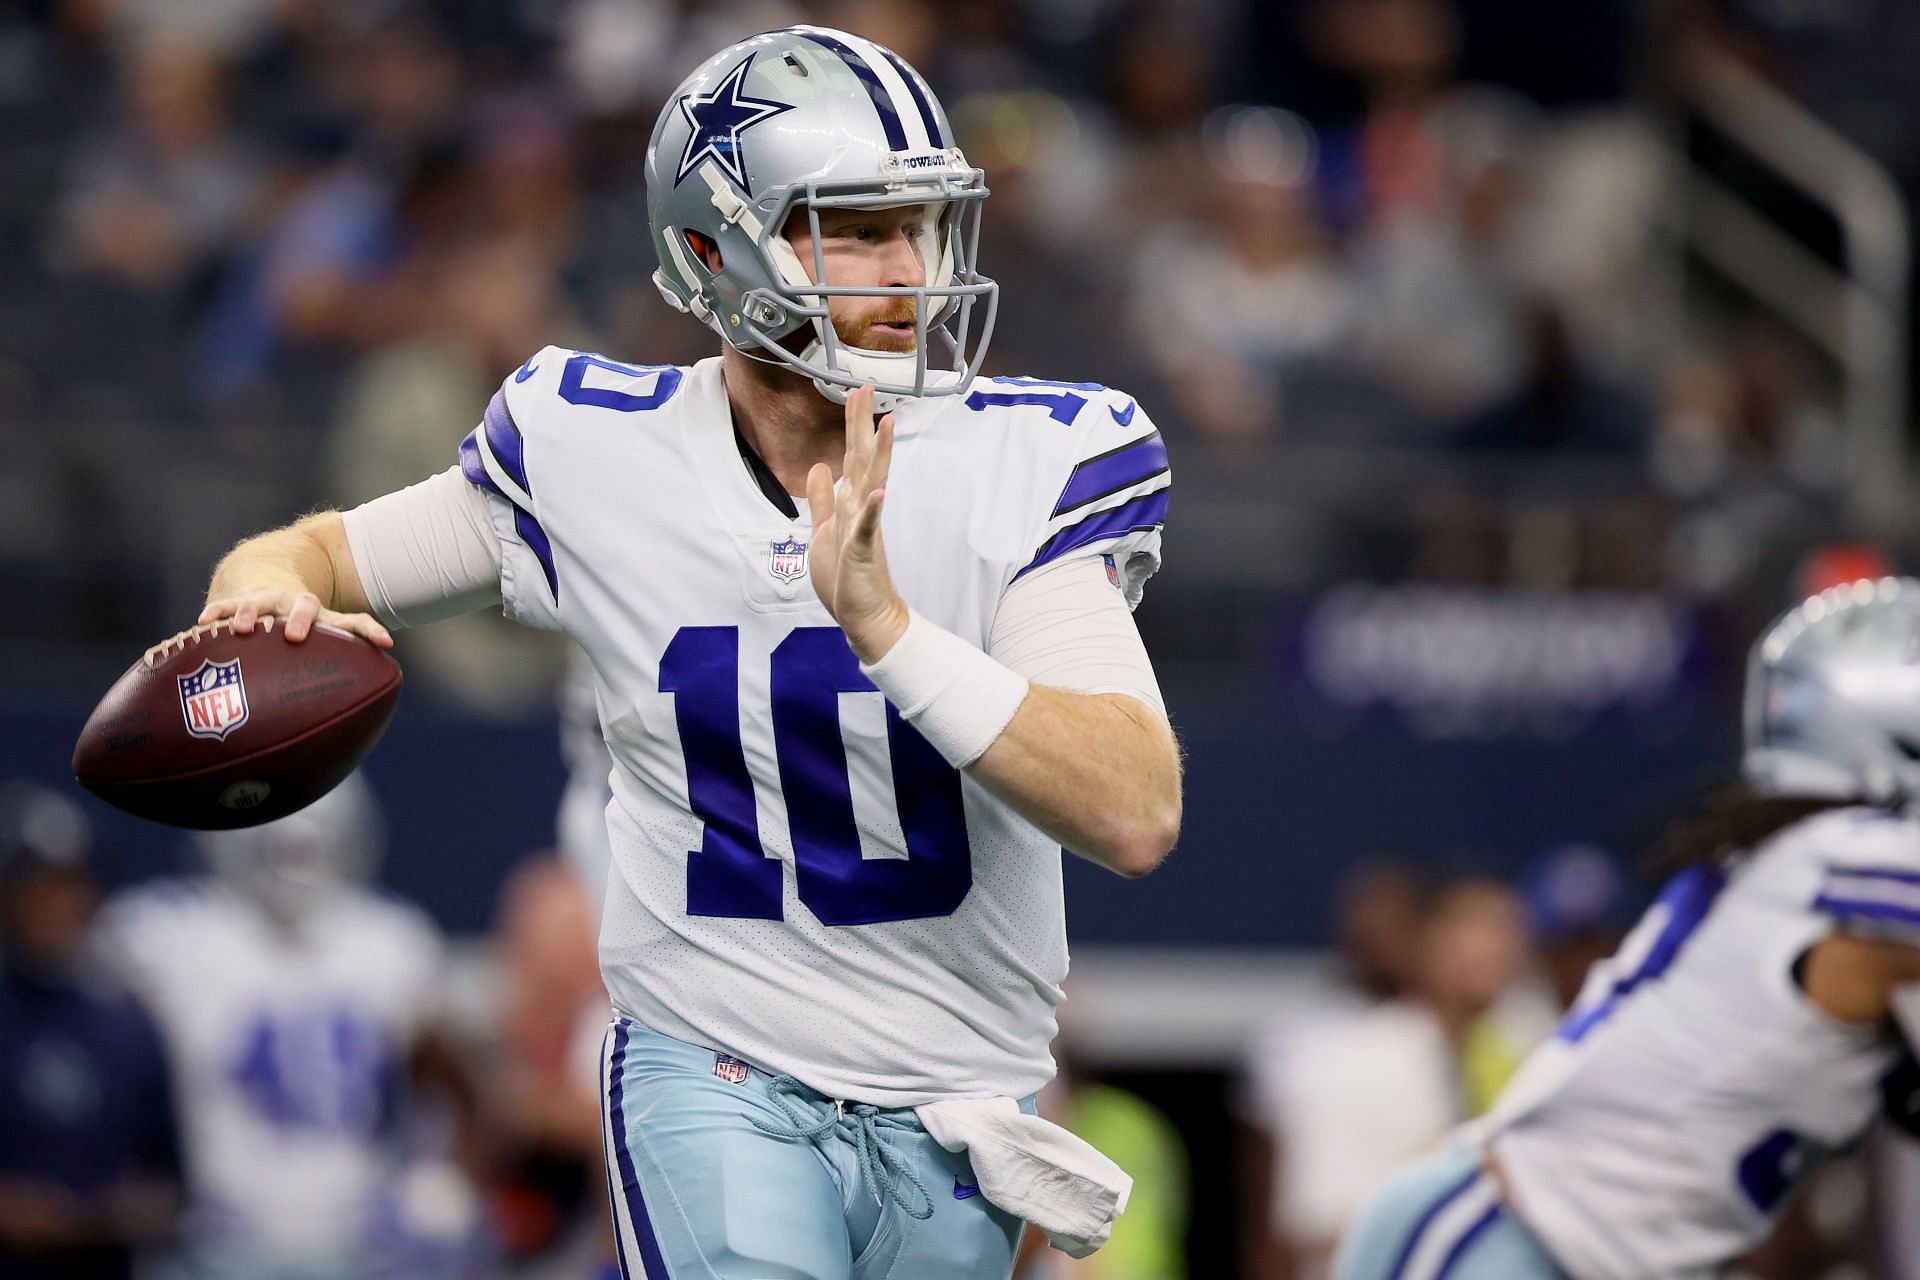 The Dallas Cowboys will have Cooper Rush under center on MNF